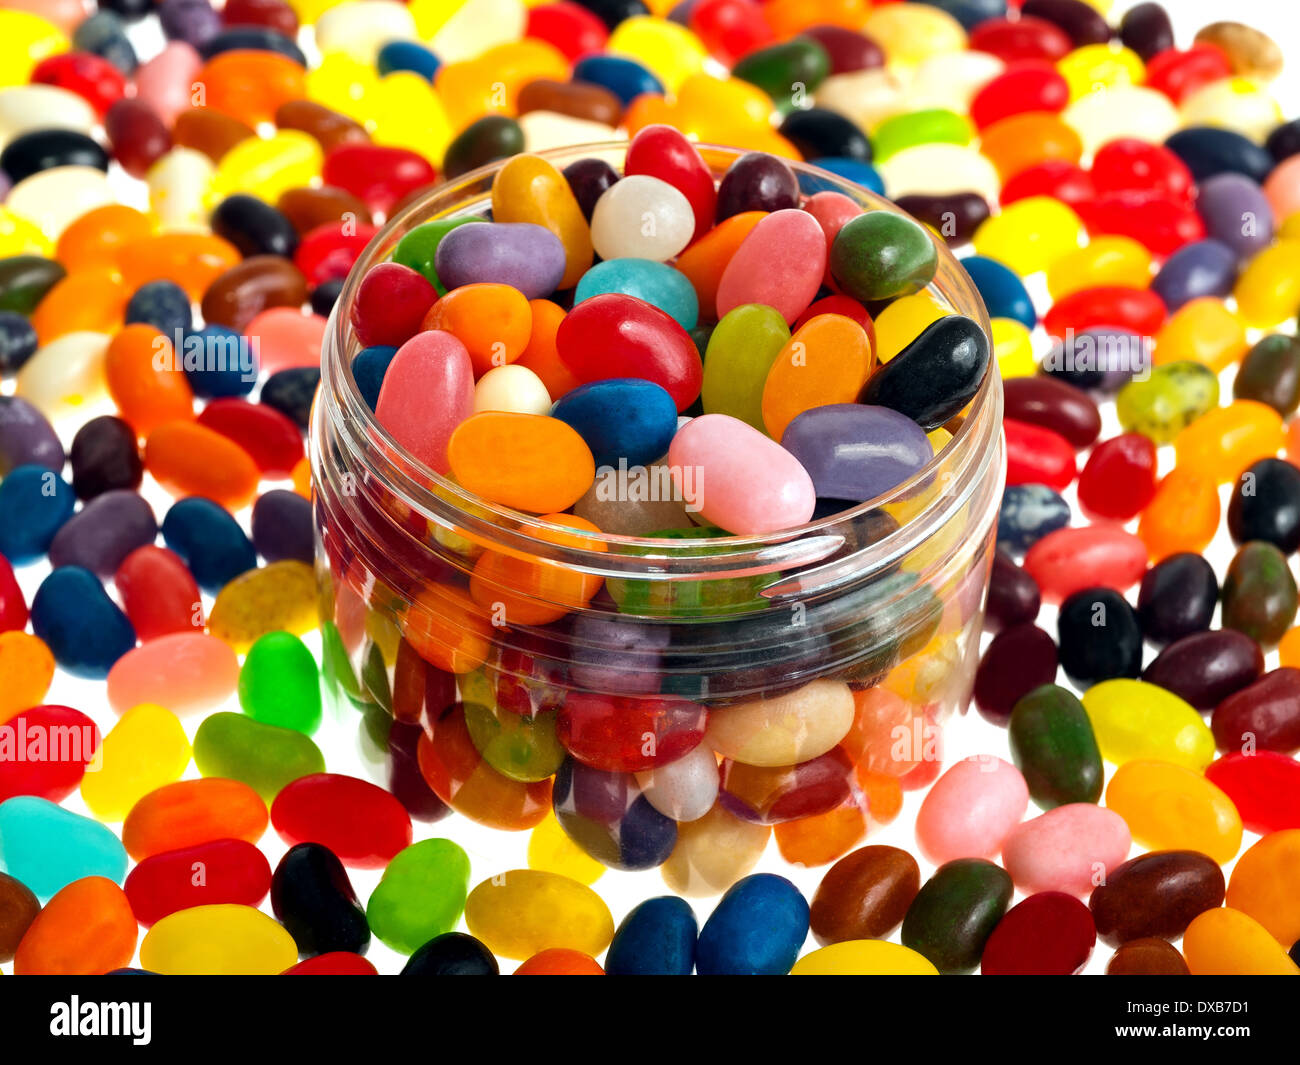 Multi-colored jelly beans mix Stock Photo